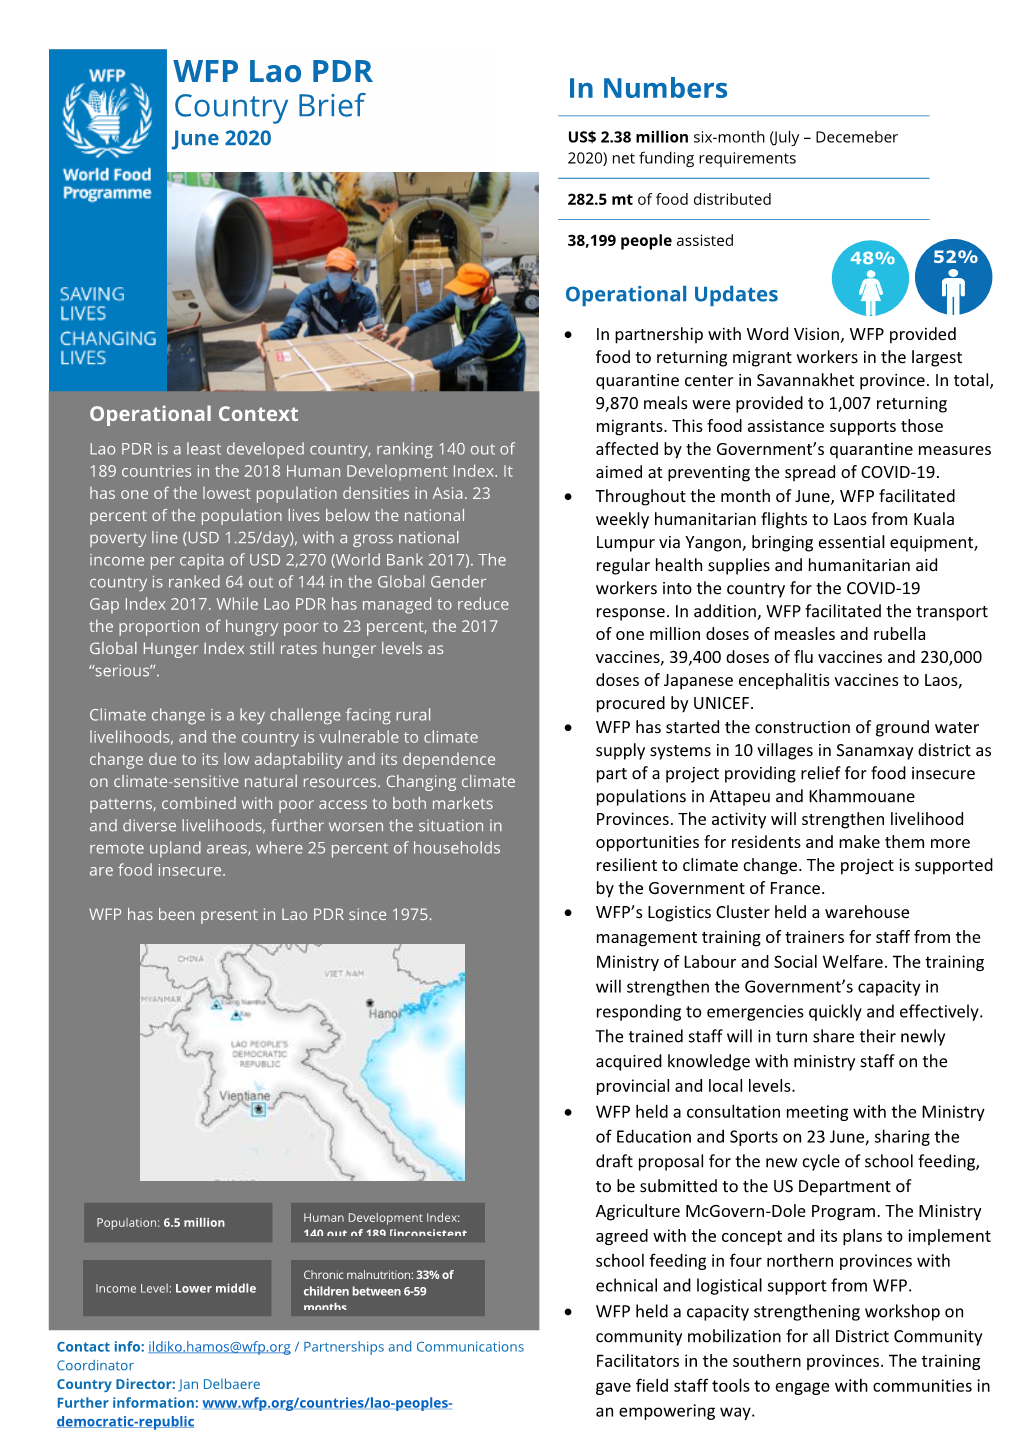 WFP Lao PDR Country Brief June 2020 USA, Australia, Japan, France, Russia, Global Agriculture and Food Security Programme, Government of Lao PDR, Private Donors